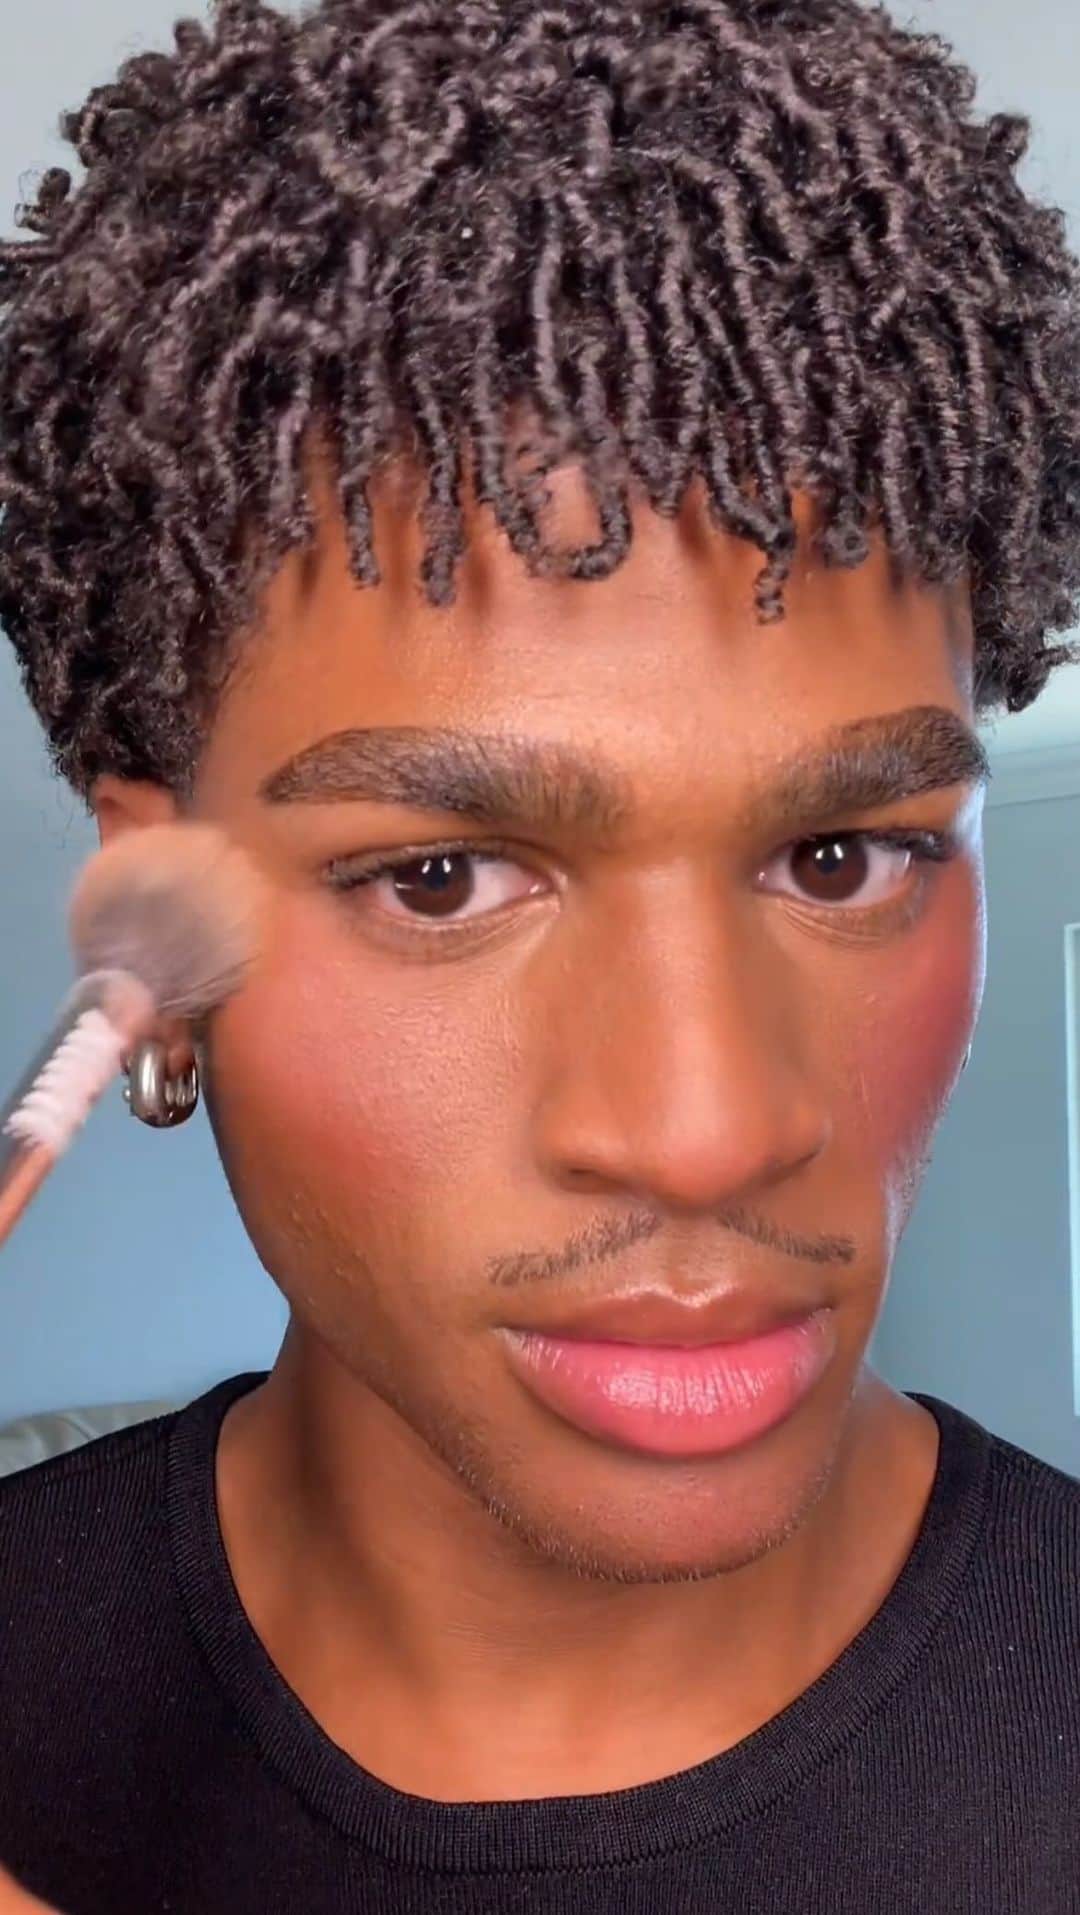 Milk Makeupのインスタグラム：「Shine, where?? 🤌 Watch @jakobejay (he/him) try our NEW! Pore Eclipse Matte Translucent Setting Powder in Translucent Medium for a blurred, soft-matte look in seconds 🌘  Shop it at sephora.com and milkmakeup.com NOW and in @sephora stores on 9.7 🛒」